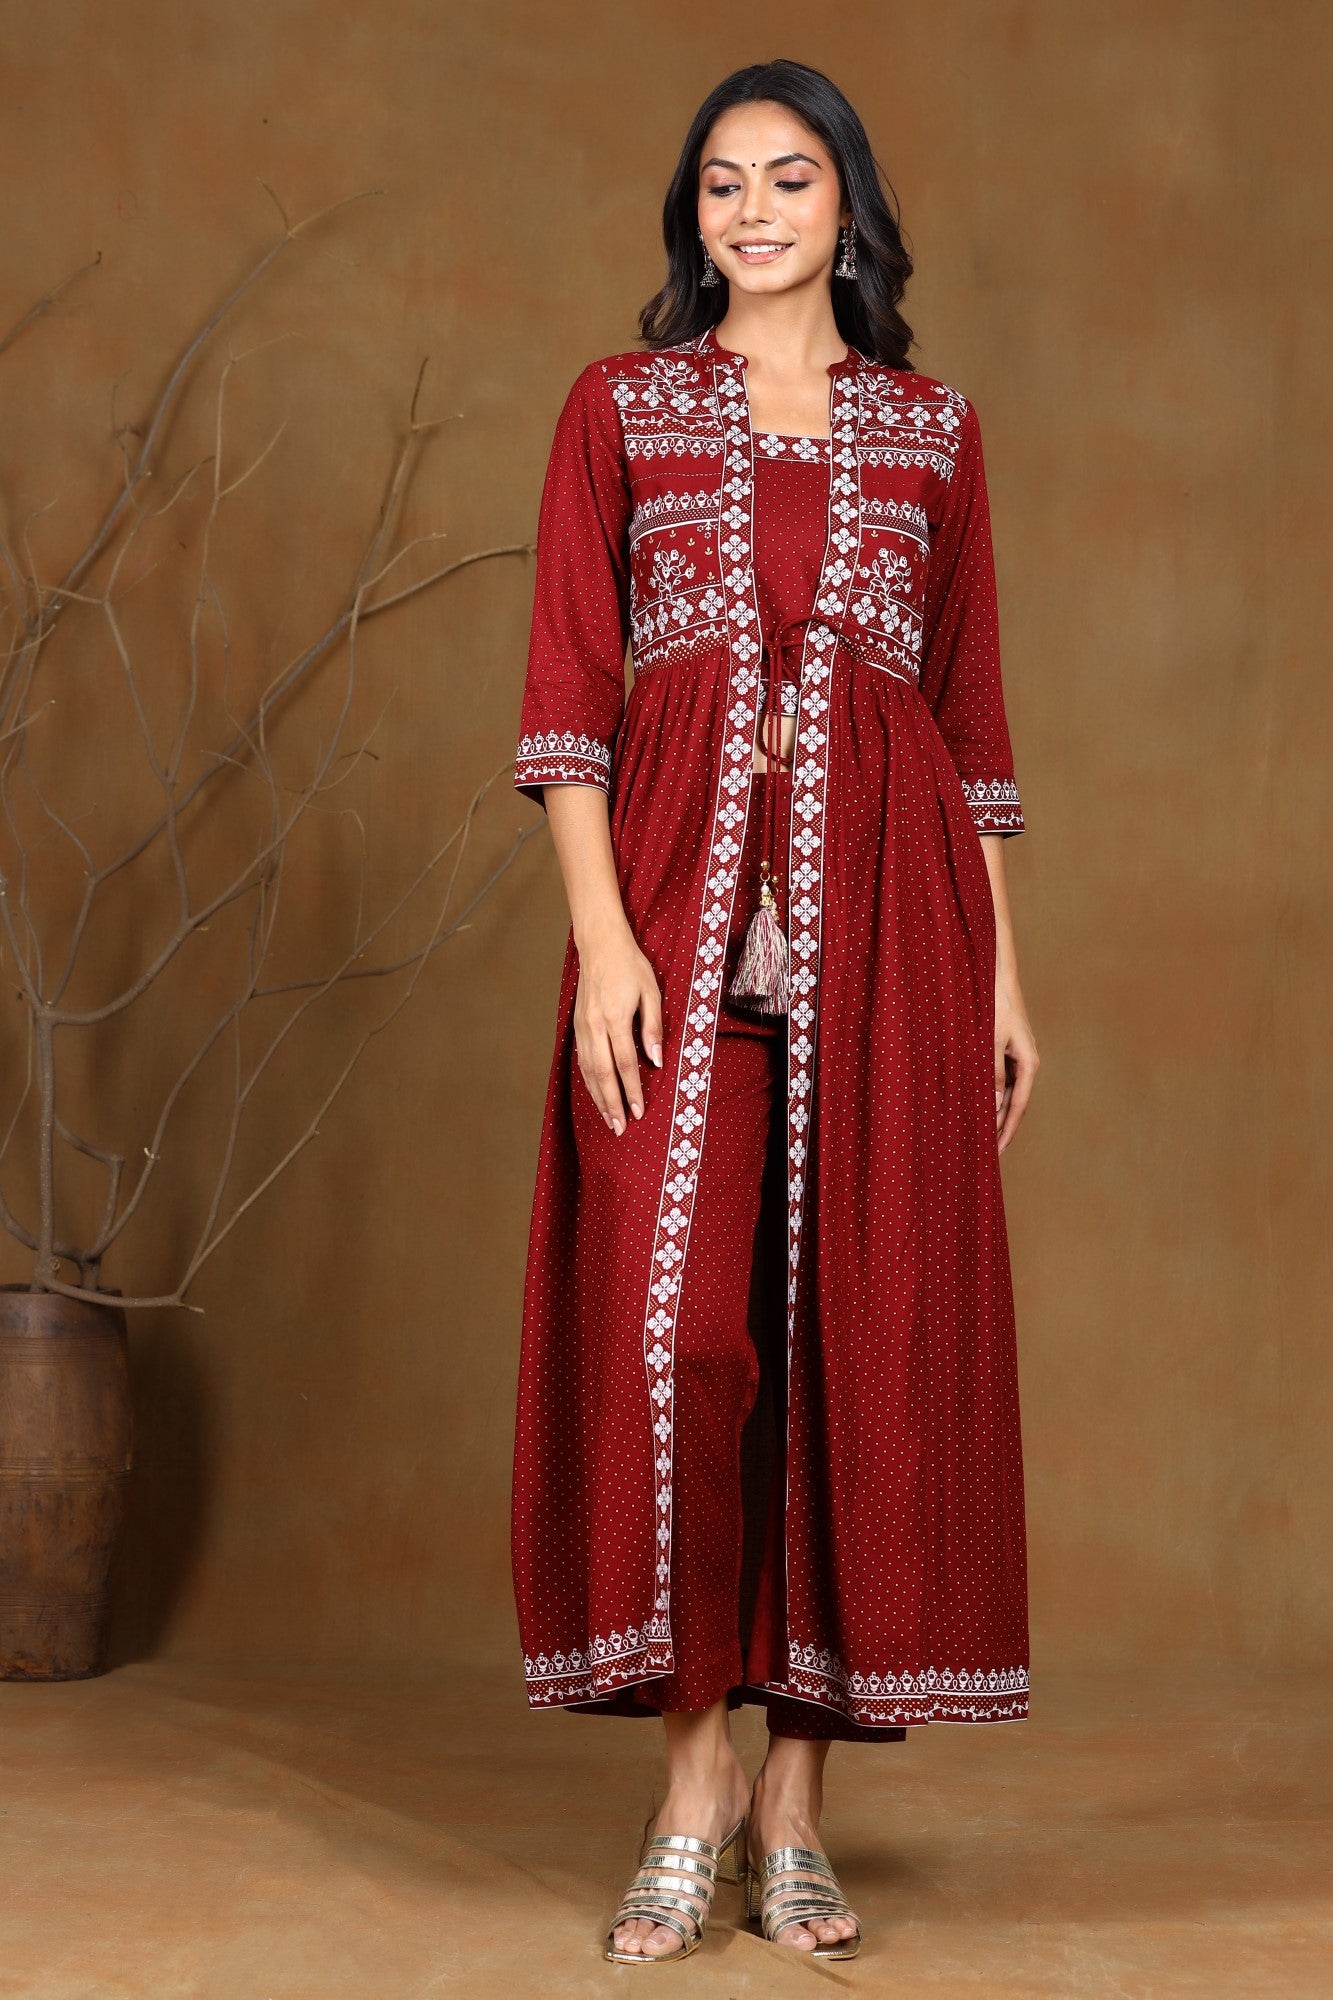 Buy White Printed Long Kurti with Jacket for Woman (XXL) at Amazon.in